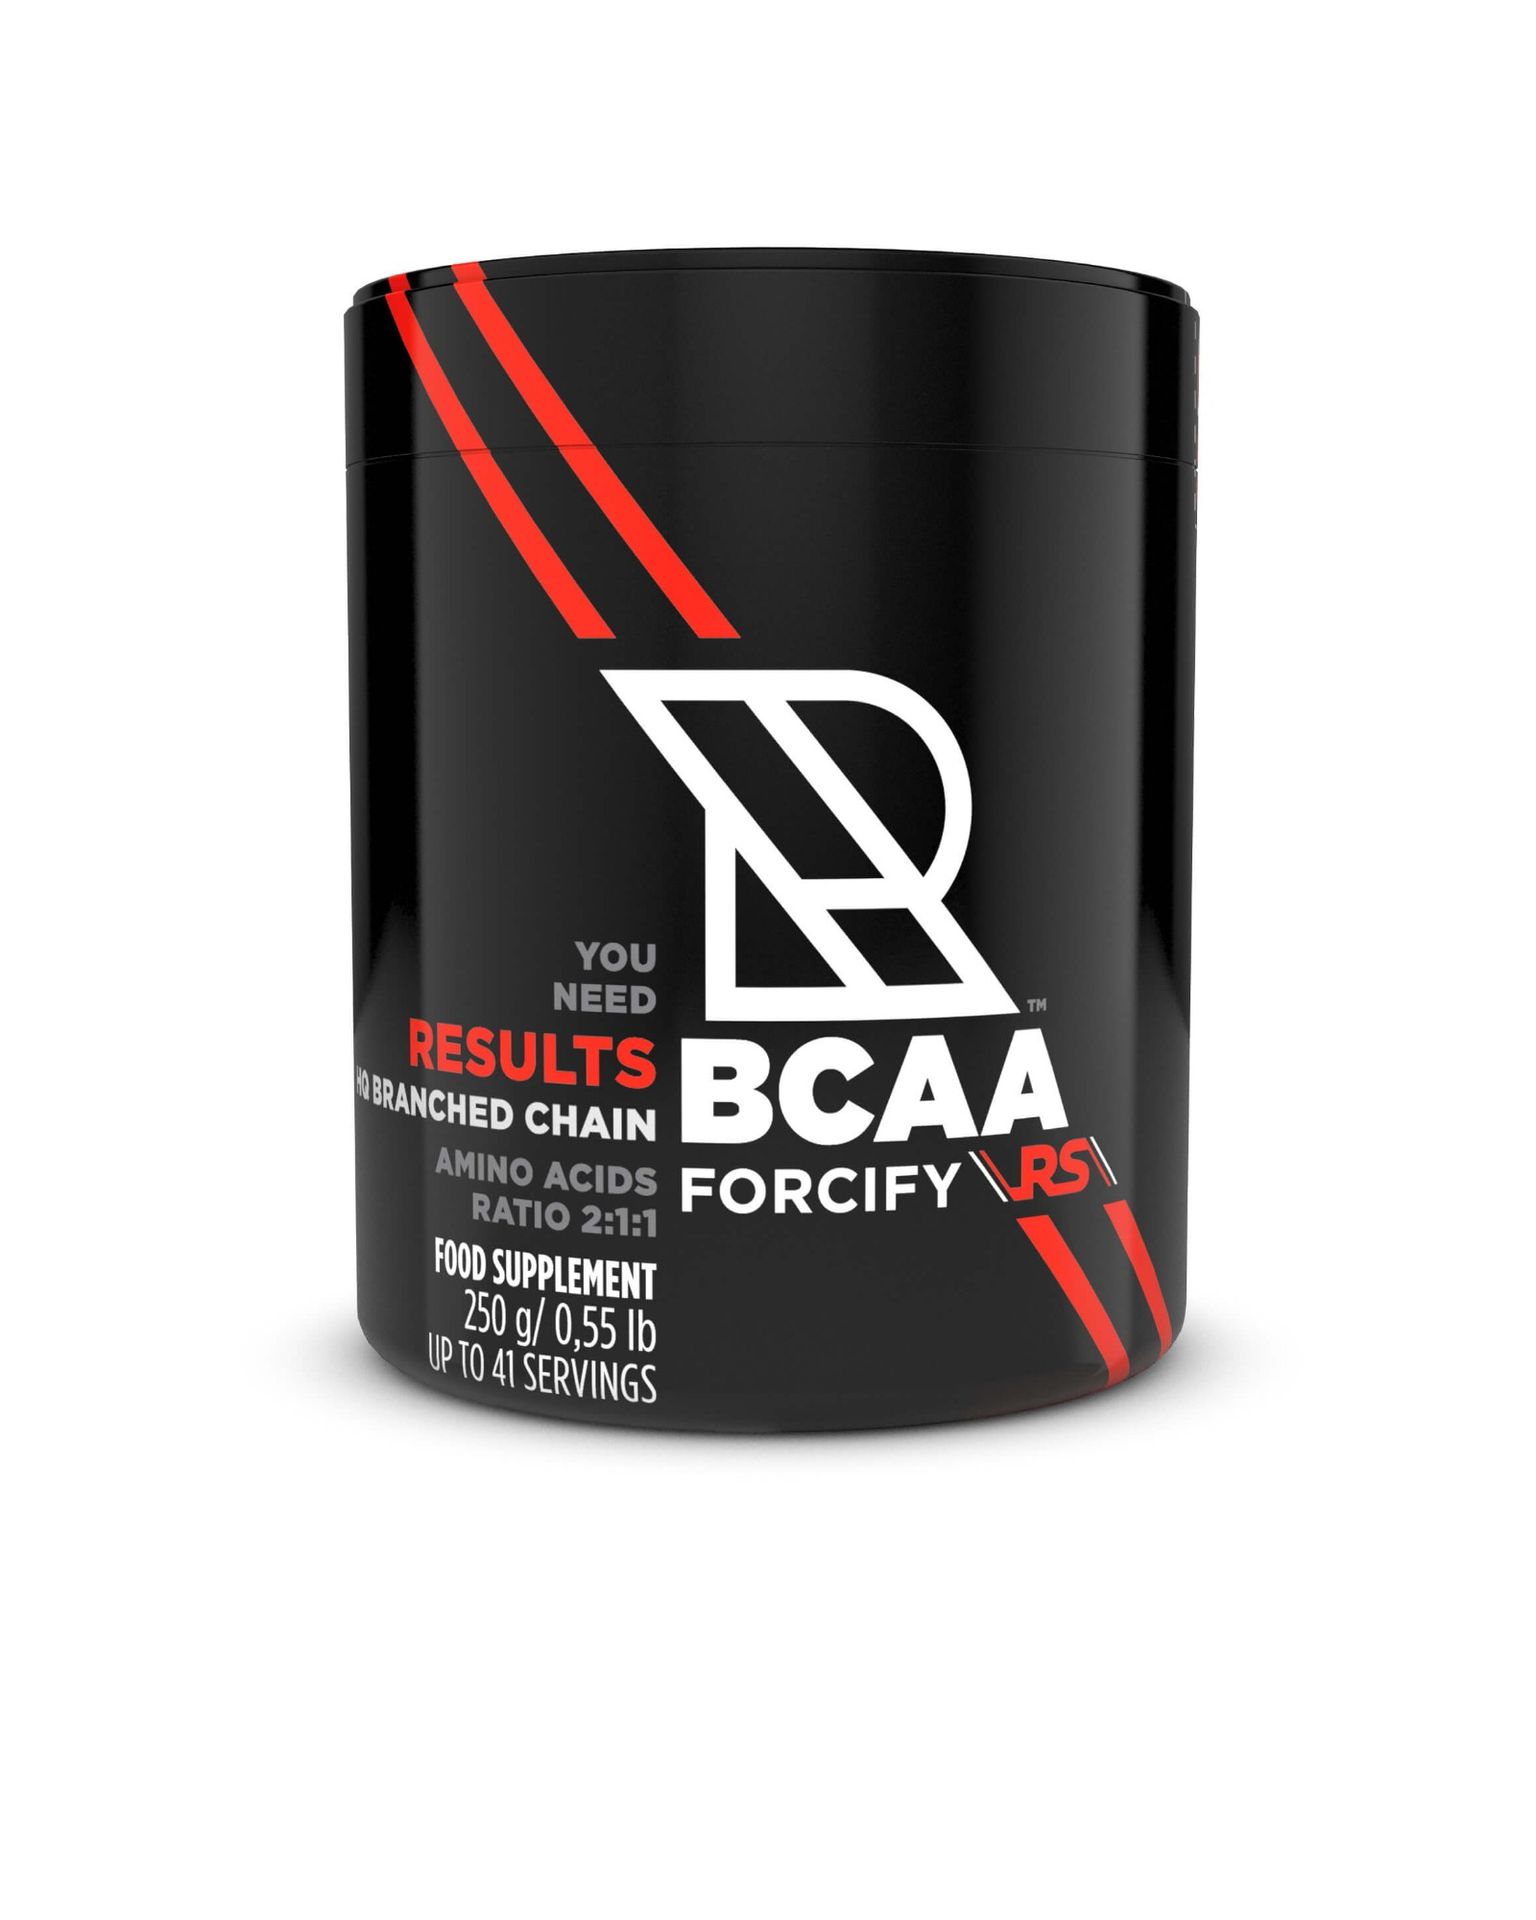 Фото - Амінокислоти RS Results Forcify BCAA  - 250 g-Bubble Gum 